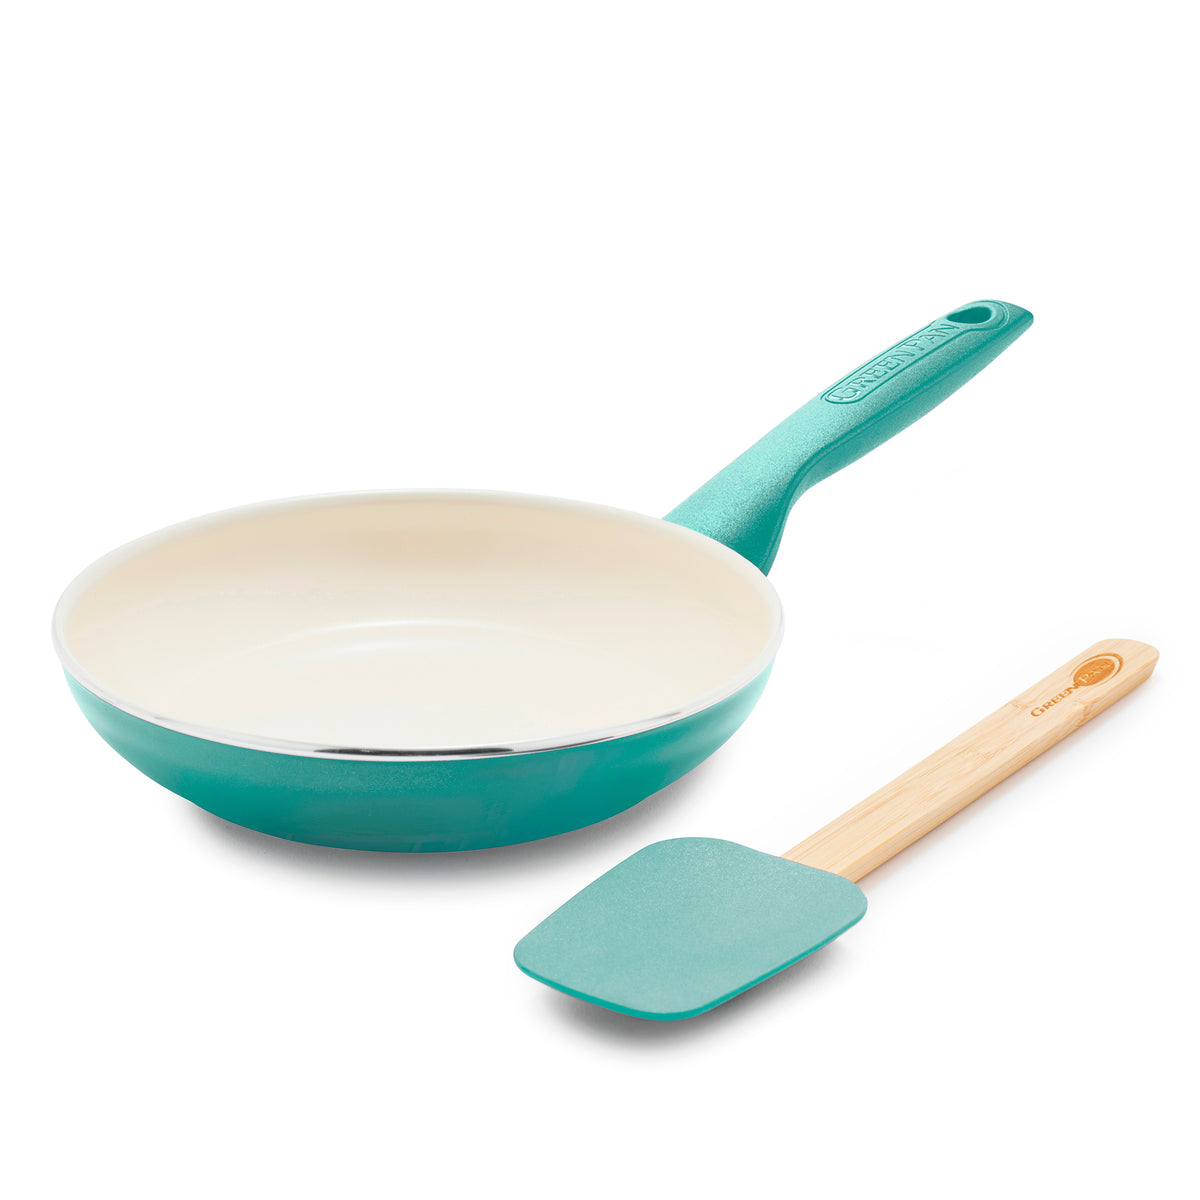 GreenPan Rio 8 Inch and 10 Inch Ceramic Non-Stick Fry Pan Set, Turquoise 